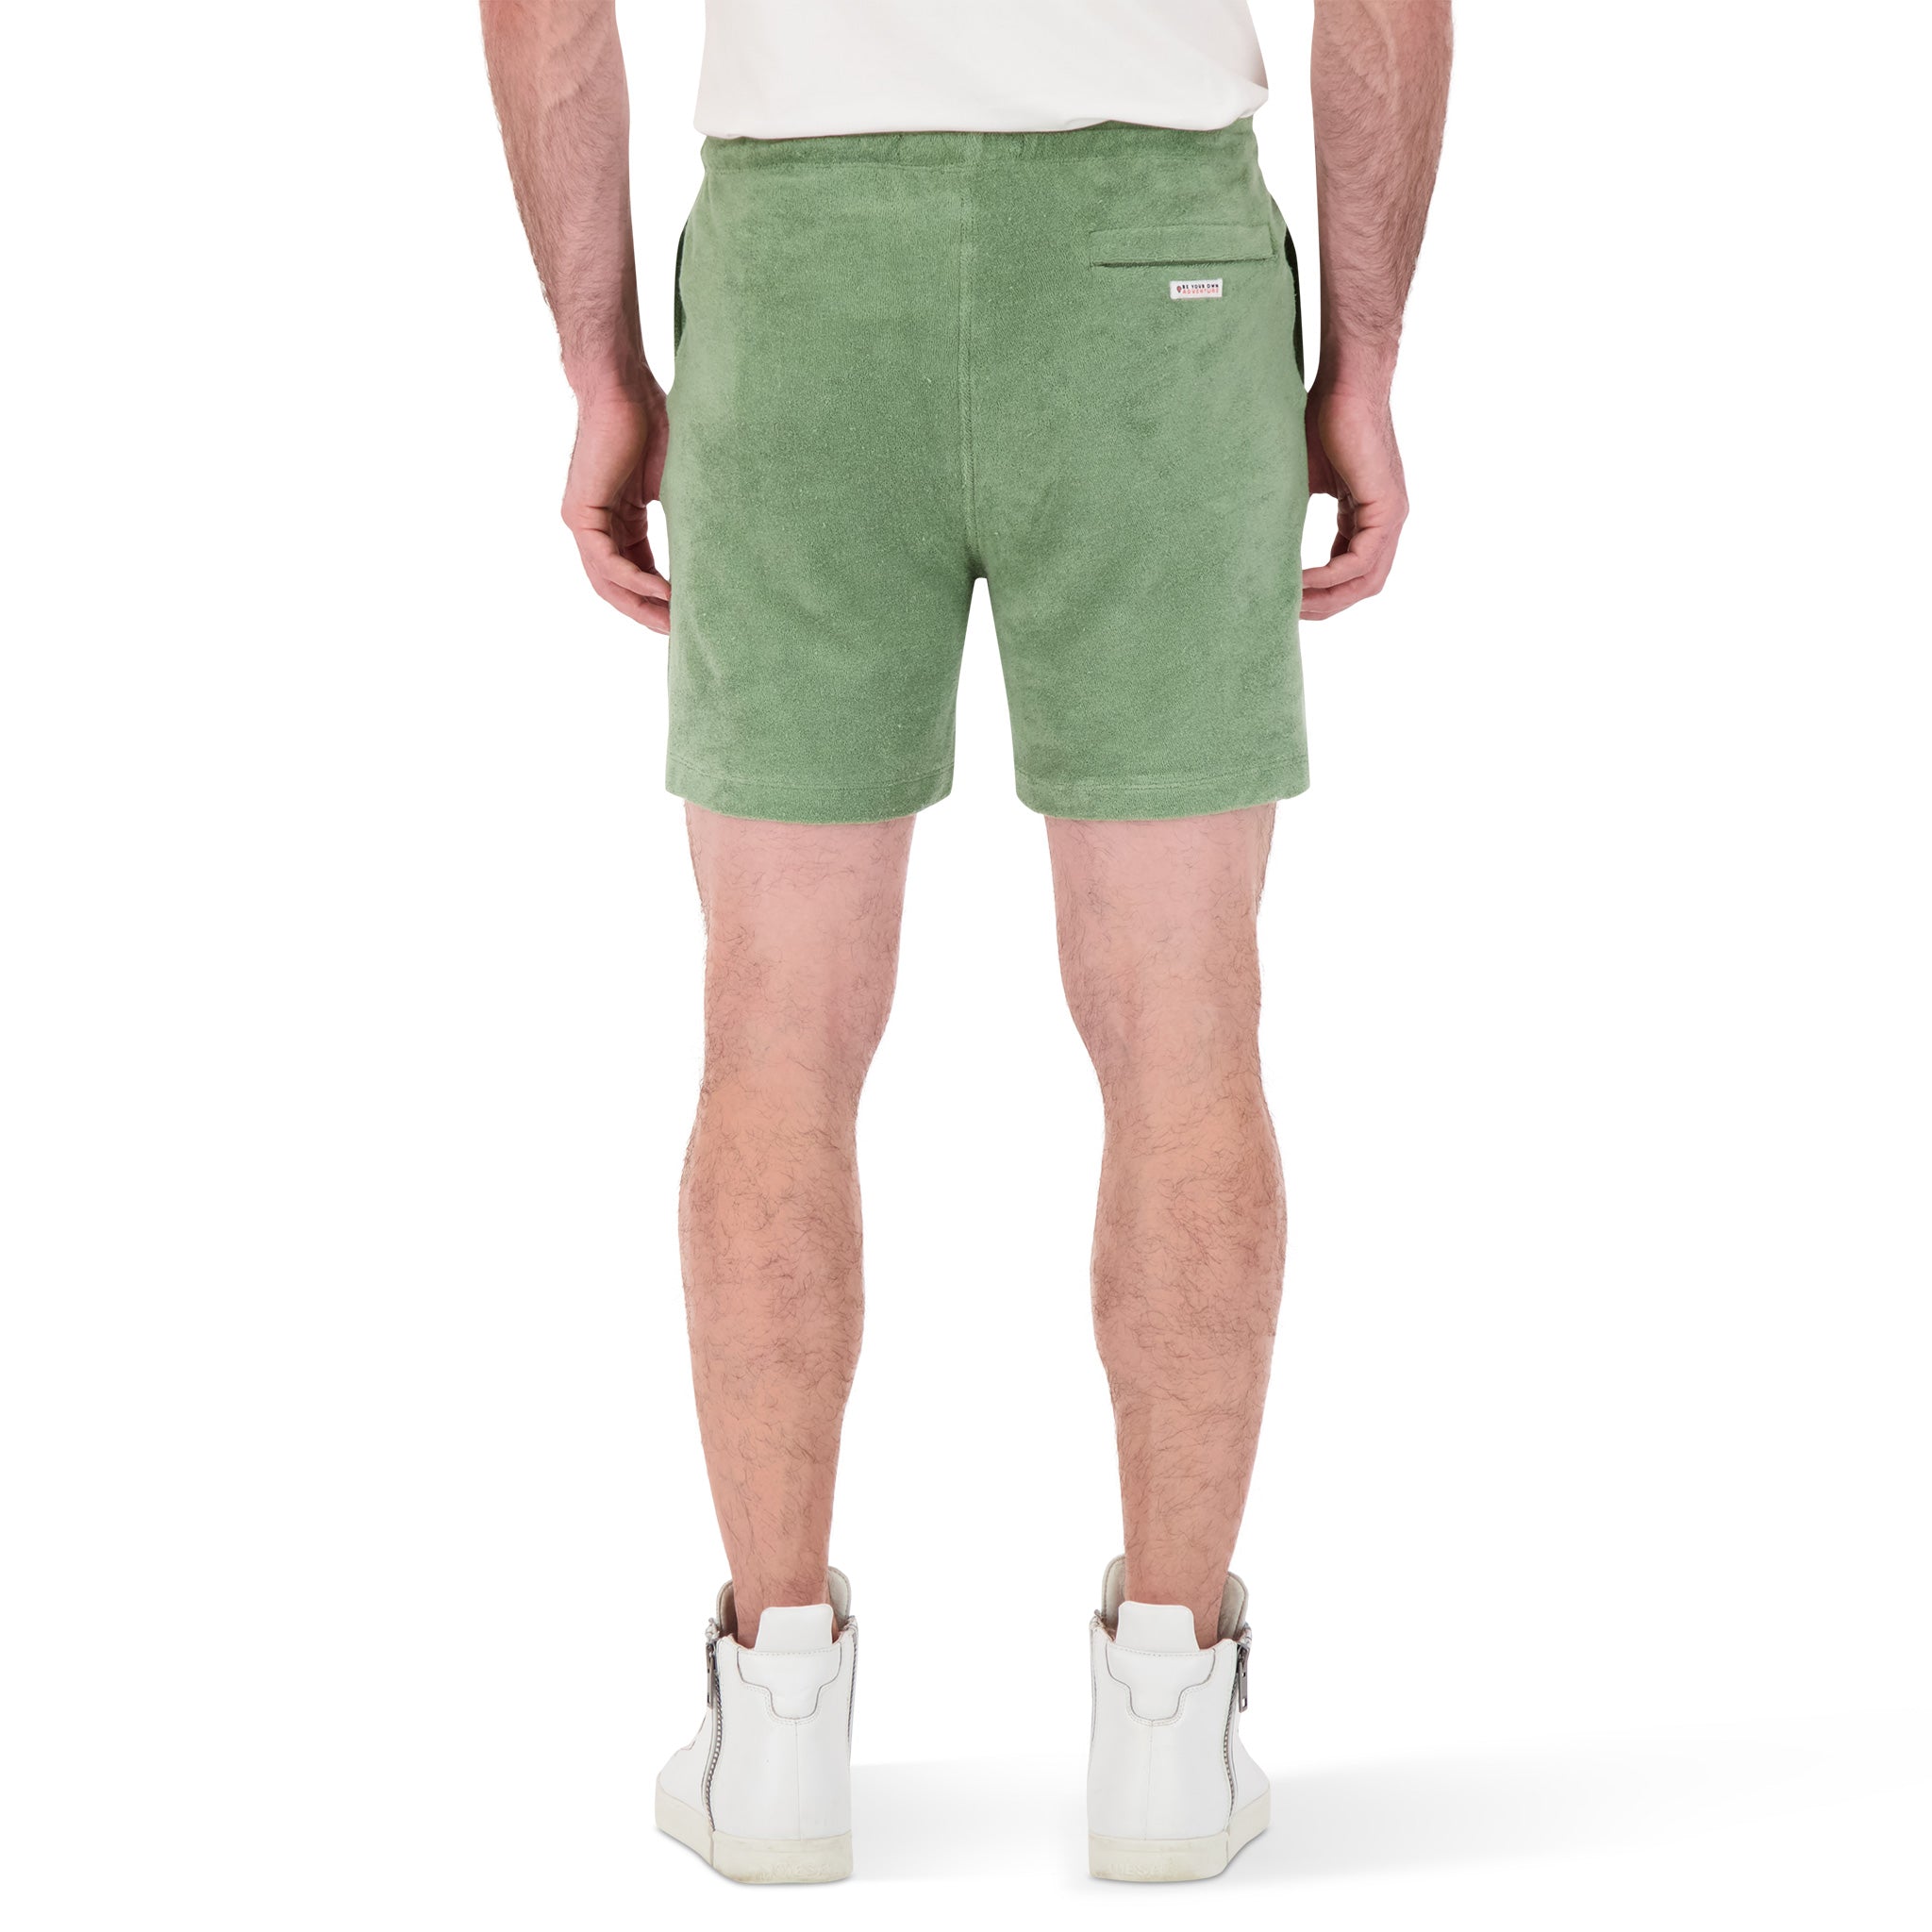 Terry Cloth Knit Shorts in Olive Green